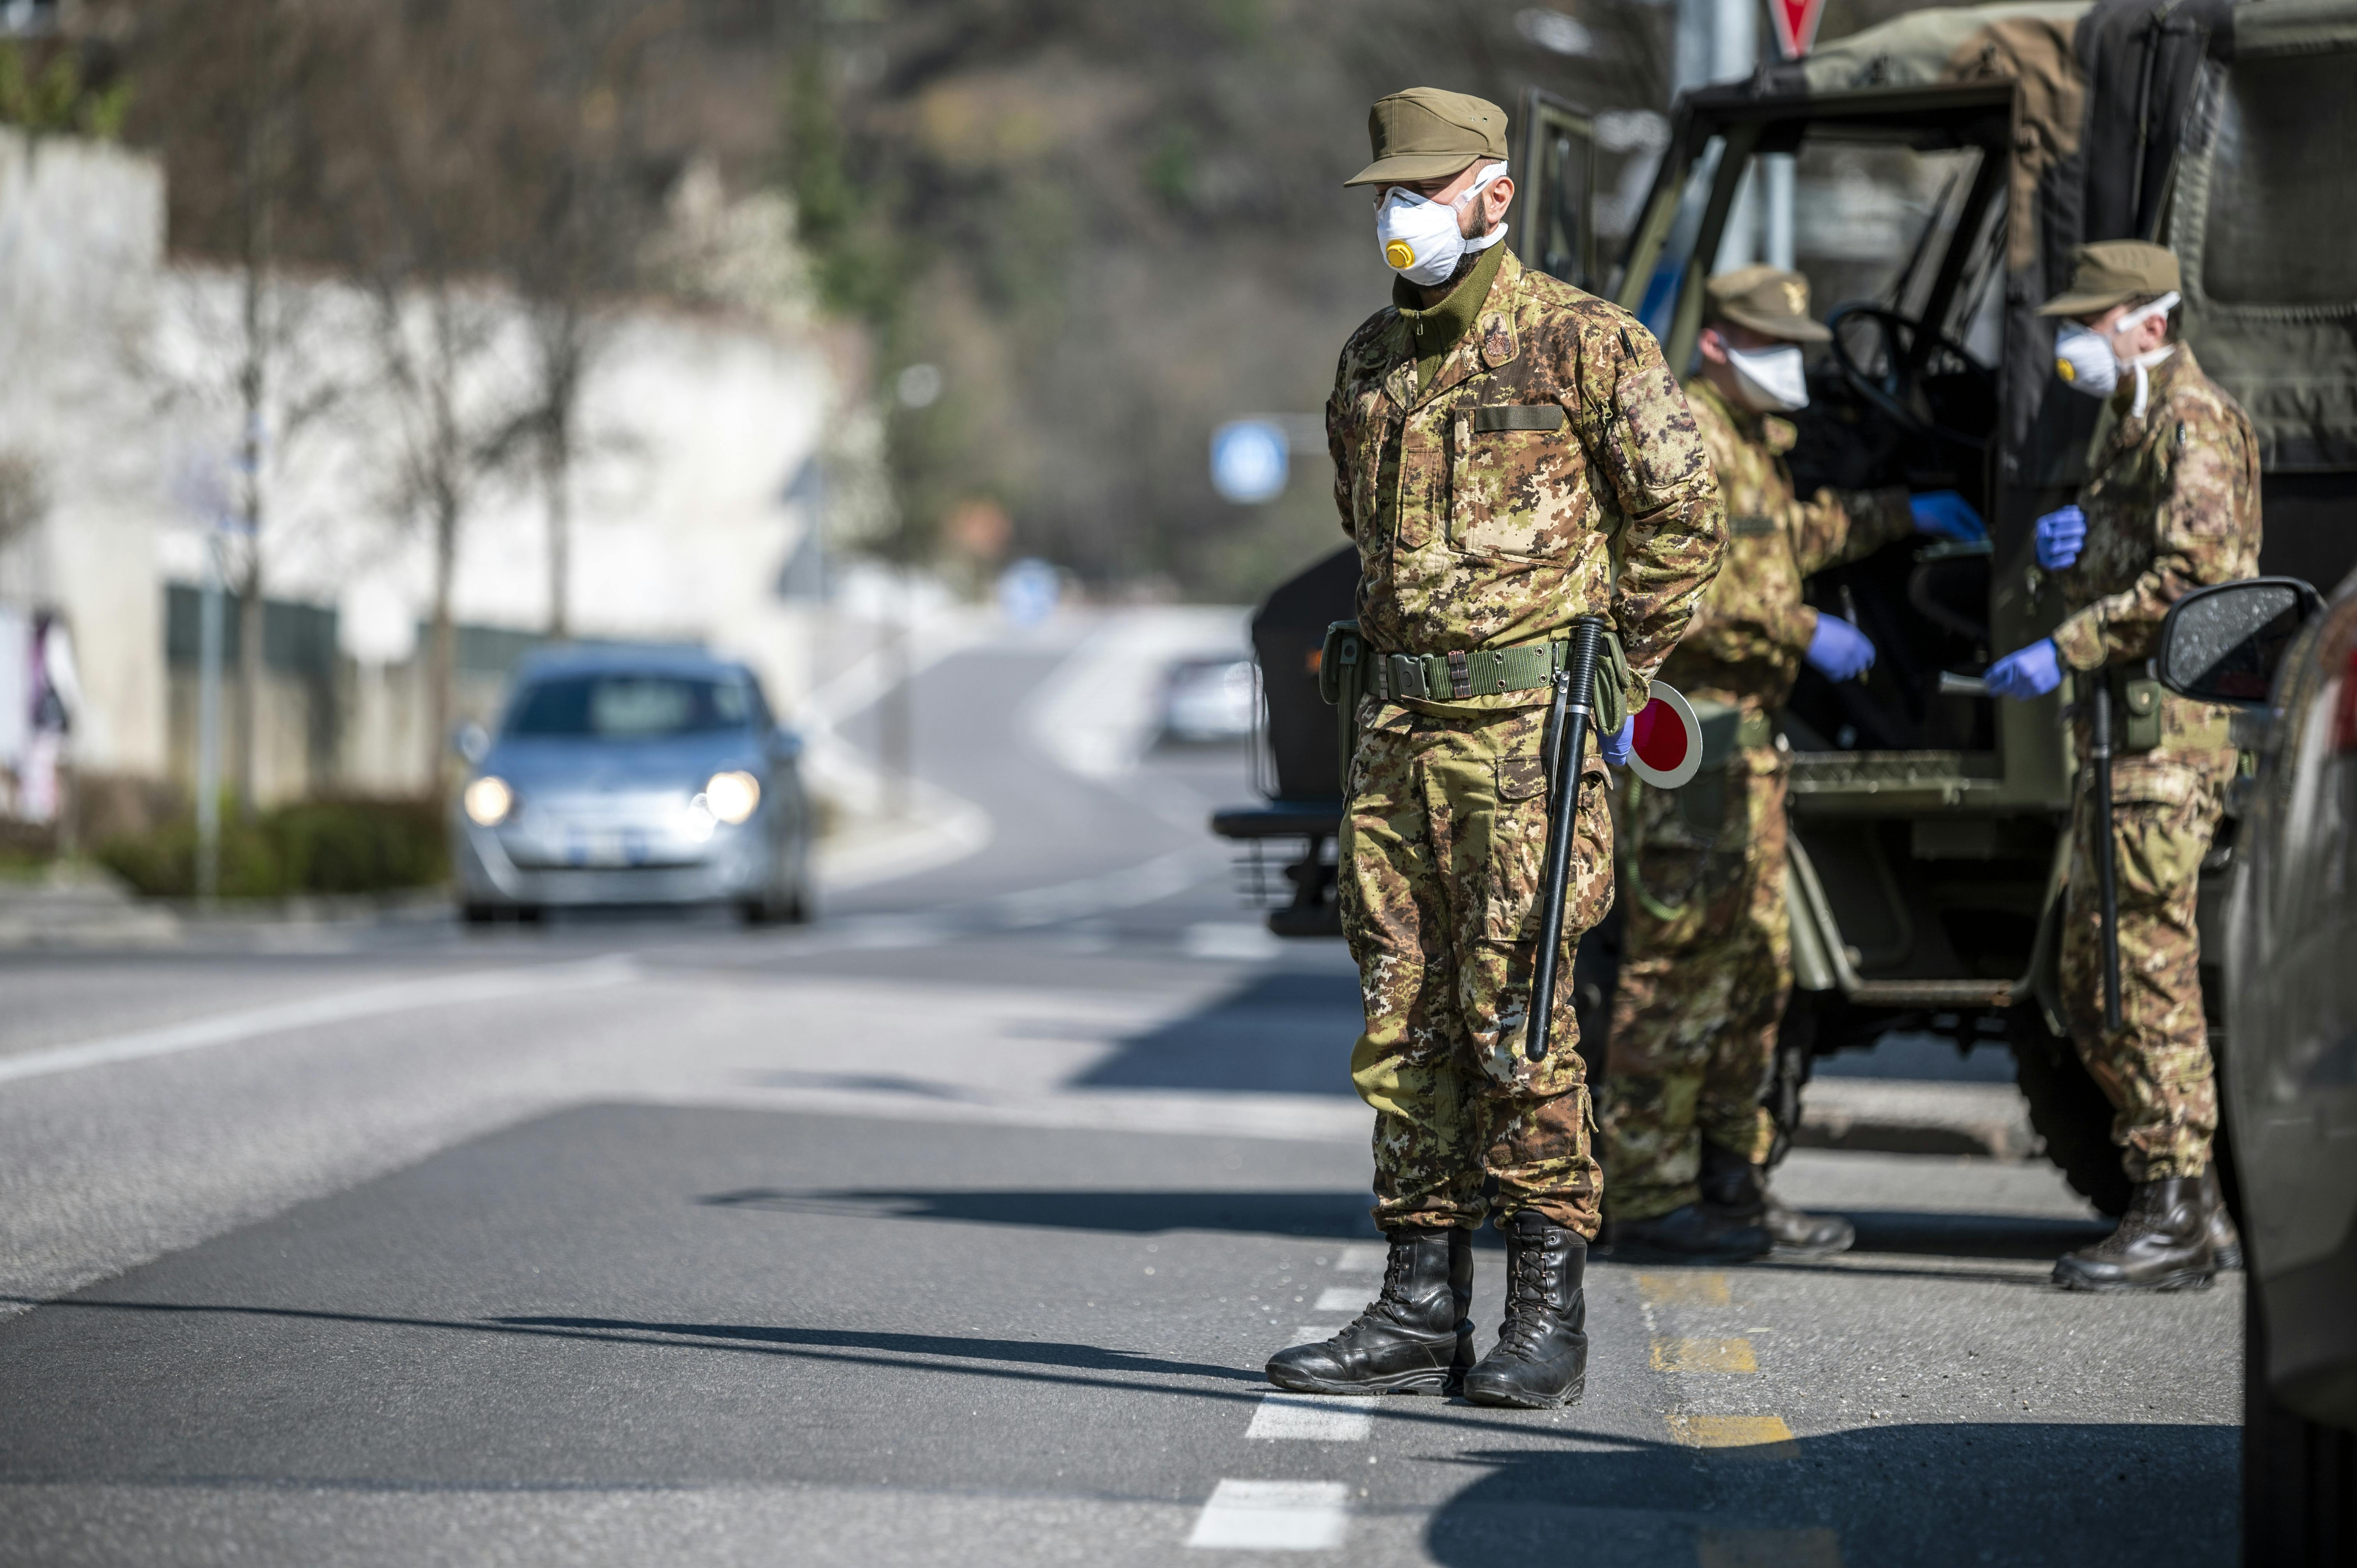 A man wearing military clothes an a mask stands before an army truck, on the side of the road. Behind him, two other soldiers are talking near the truck, wearing blue gloves and masks.